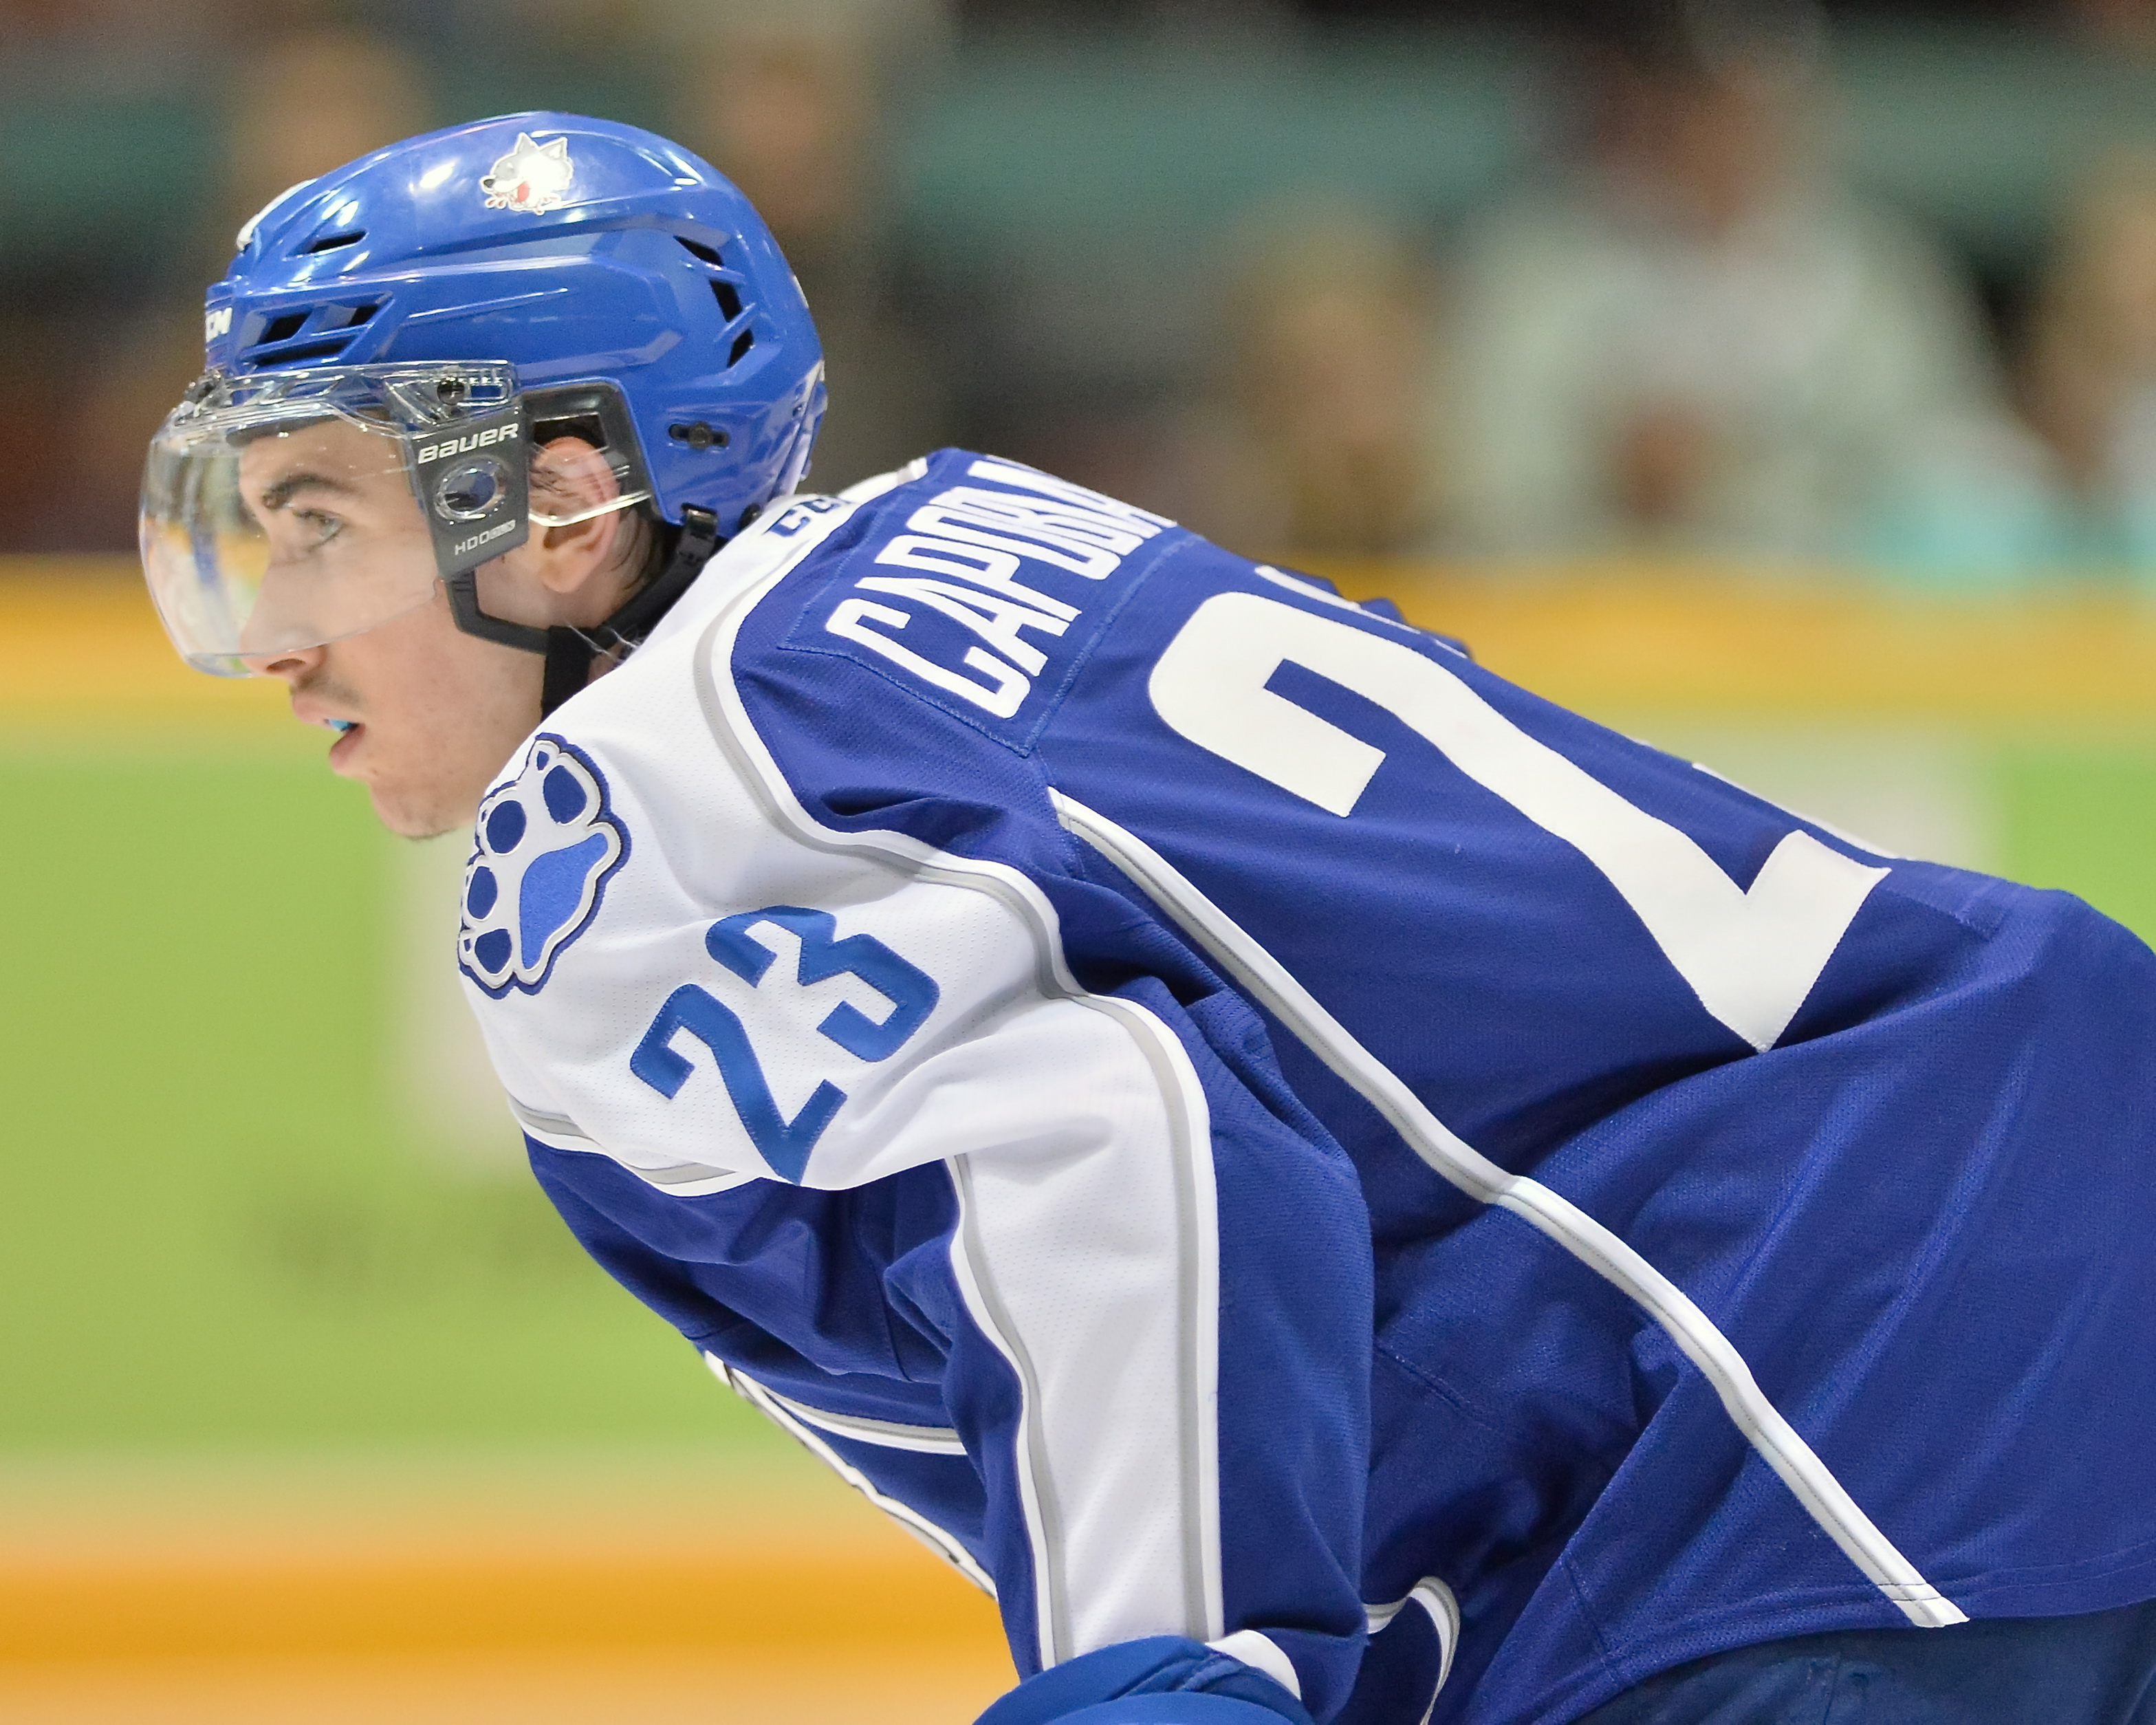 Youngblood: Mitch Marner forcing scouts to make tough decisions